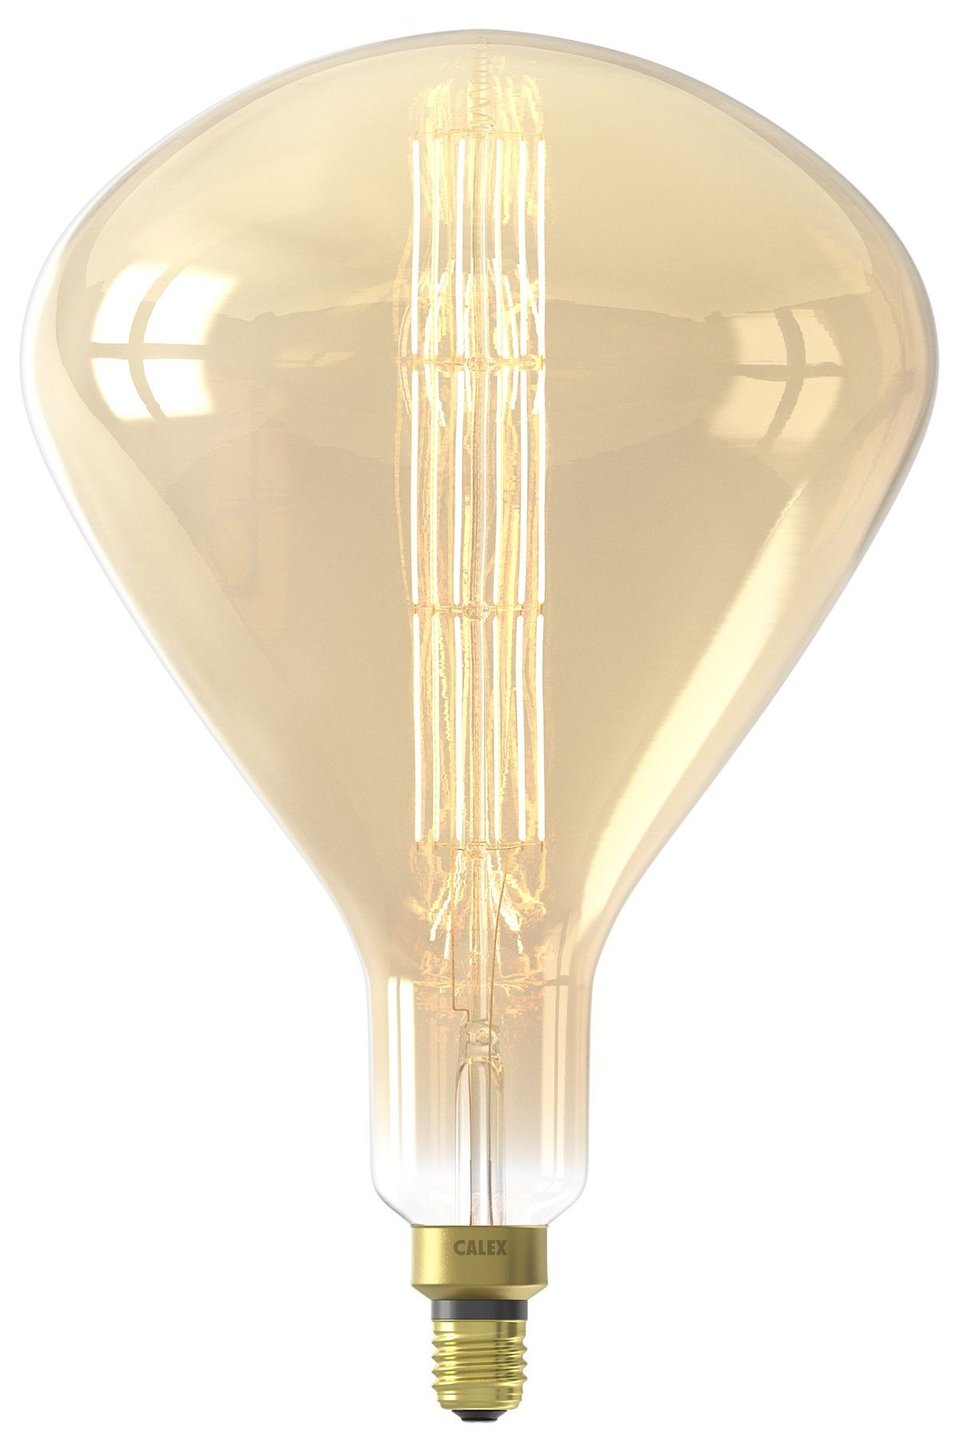 Calex Xxl Sydney Led Lamp 220-240V 8W 800Lm E27 R250, Gold 2200K Dimmable